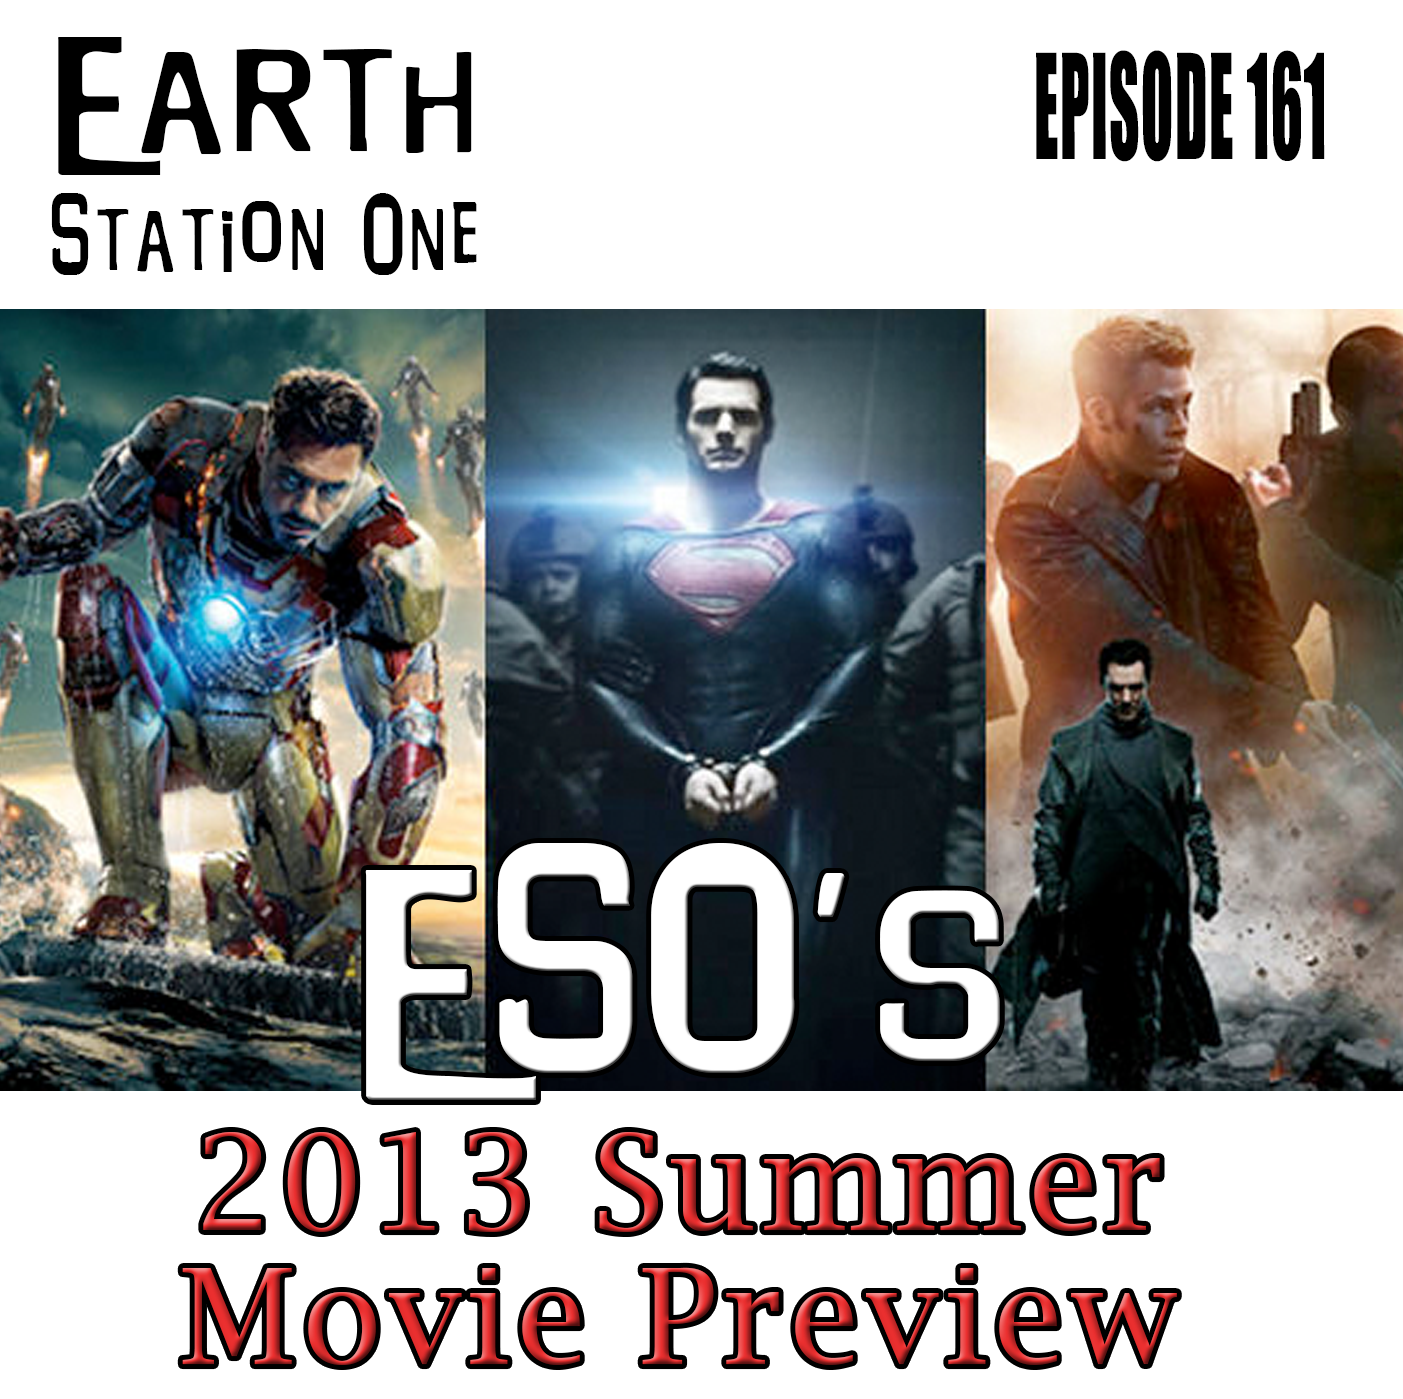 Earth Station One Episode 161 - 2013 Summer Movie Preview